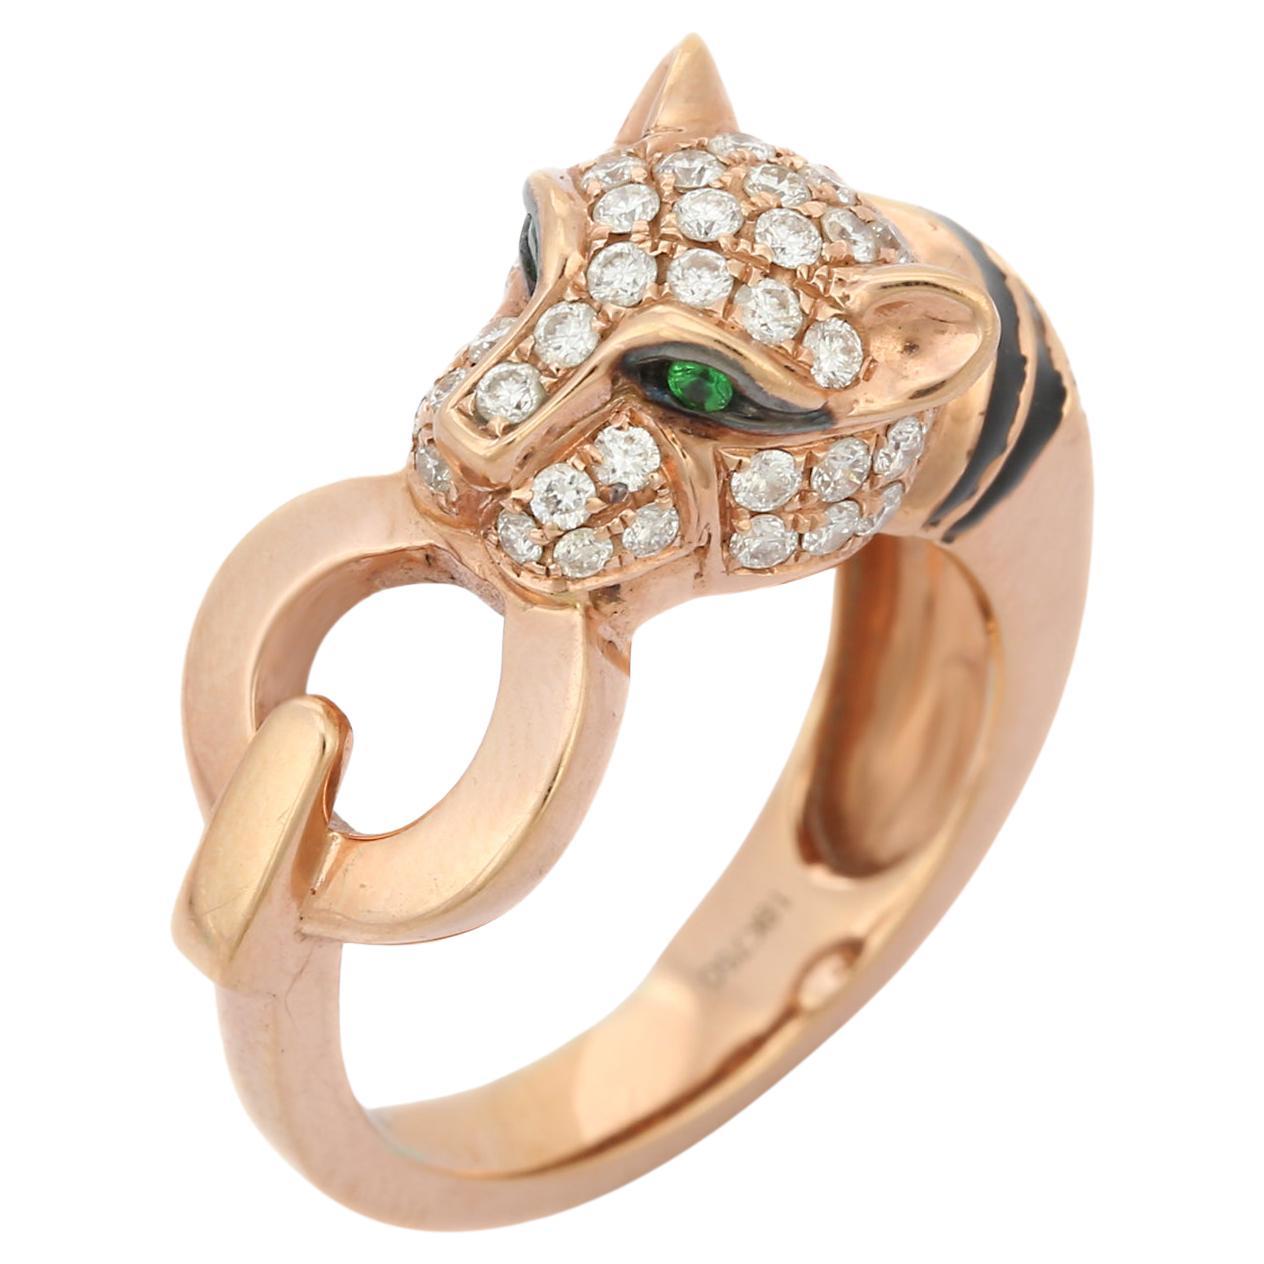 For Sale:  18K Rose Gold Iconic Panther Ring with Tsavorite and Diamond